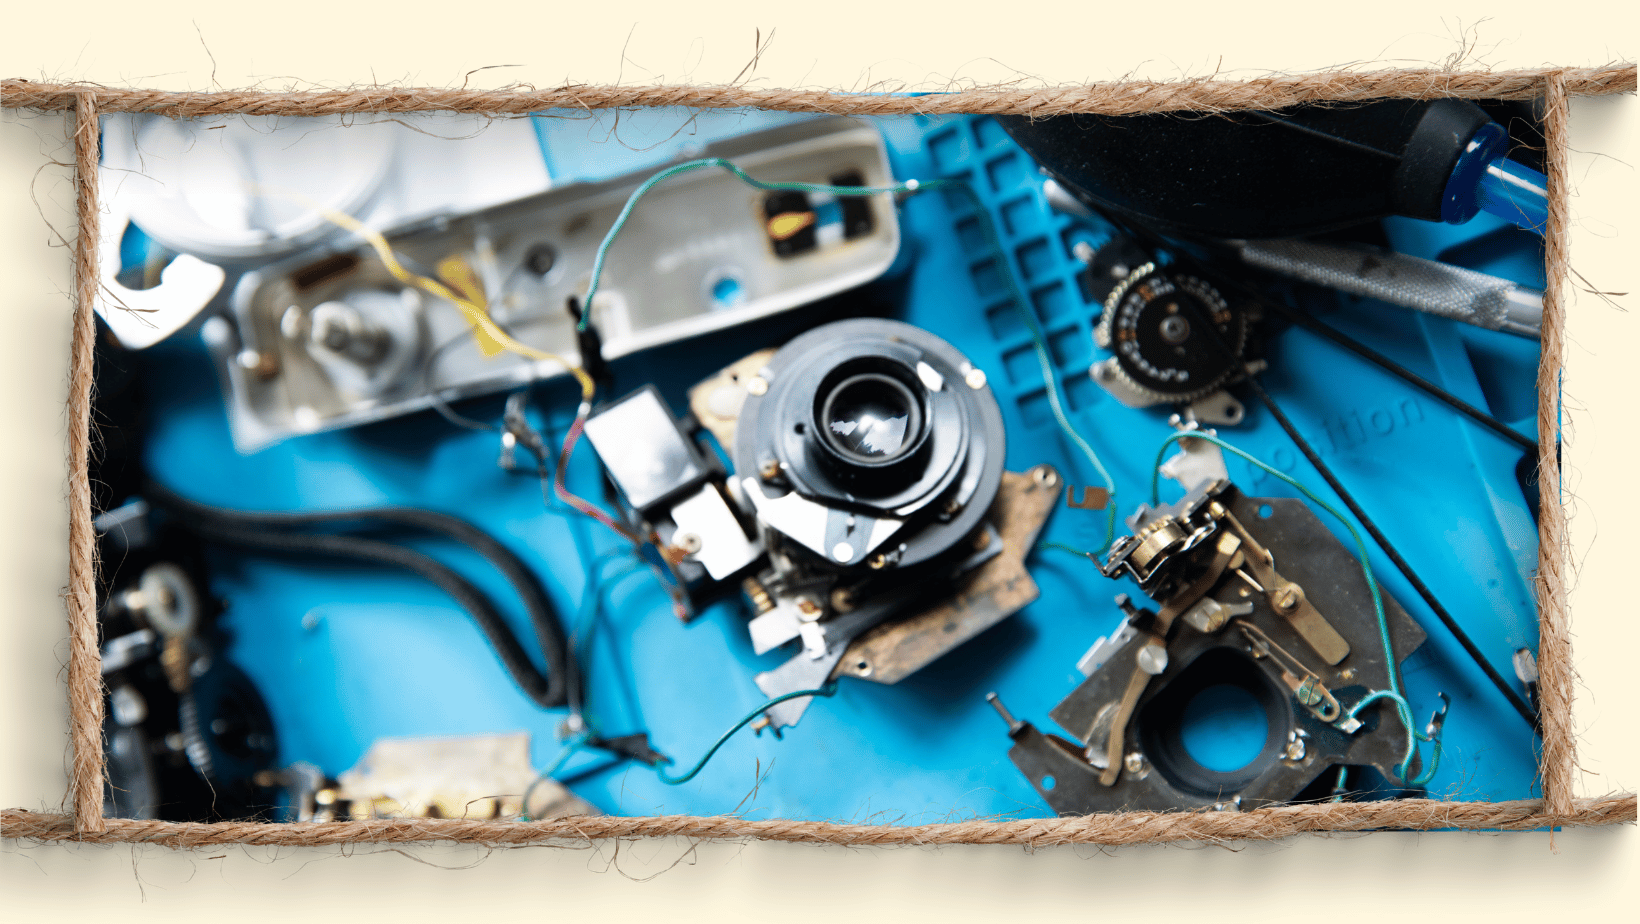 Olympus Trip 35 35mm film camera being disassembled and repaired